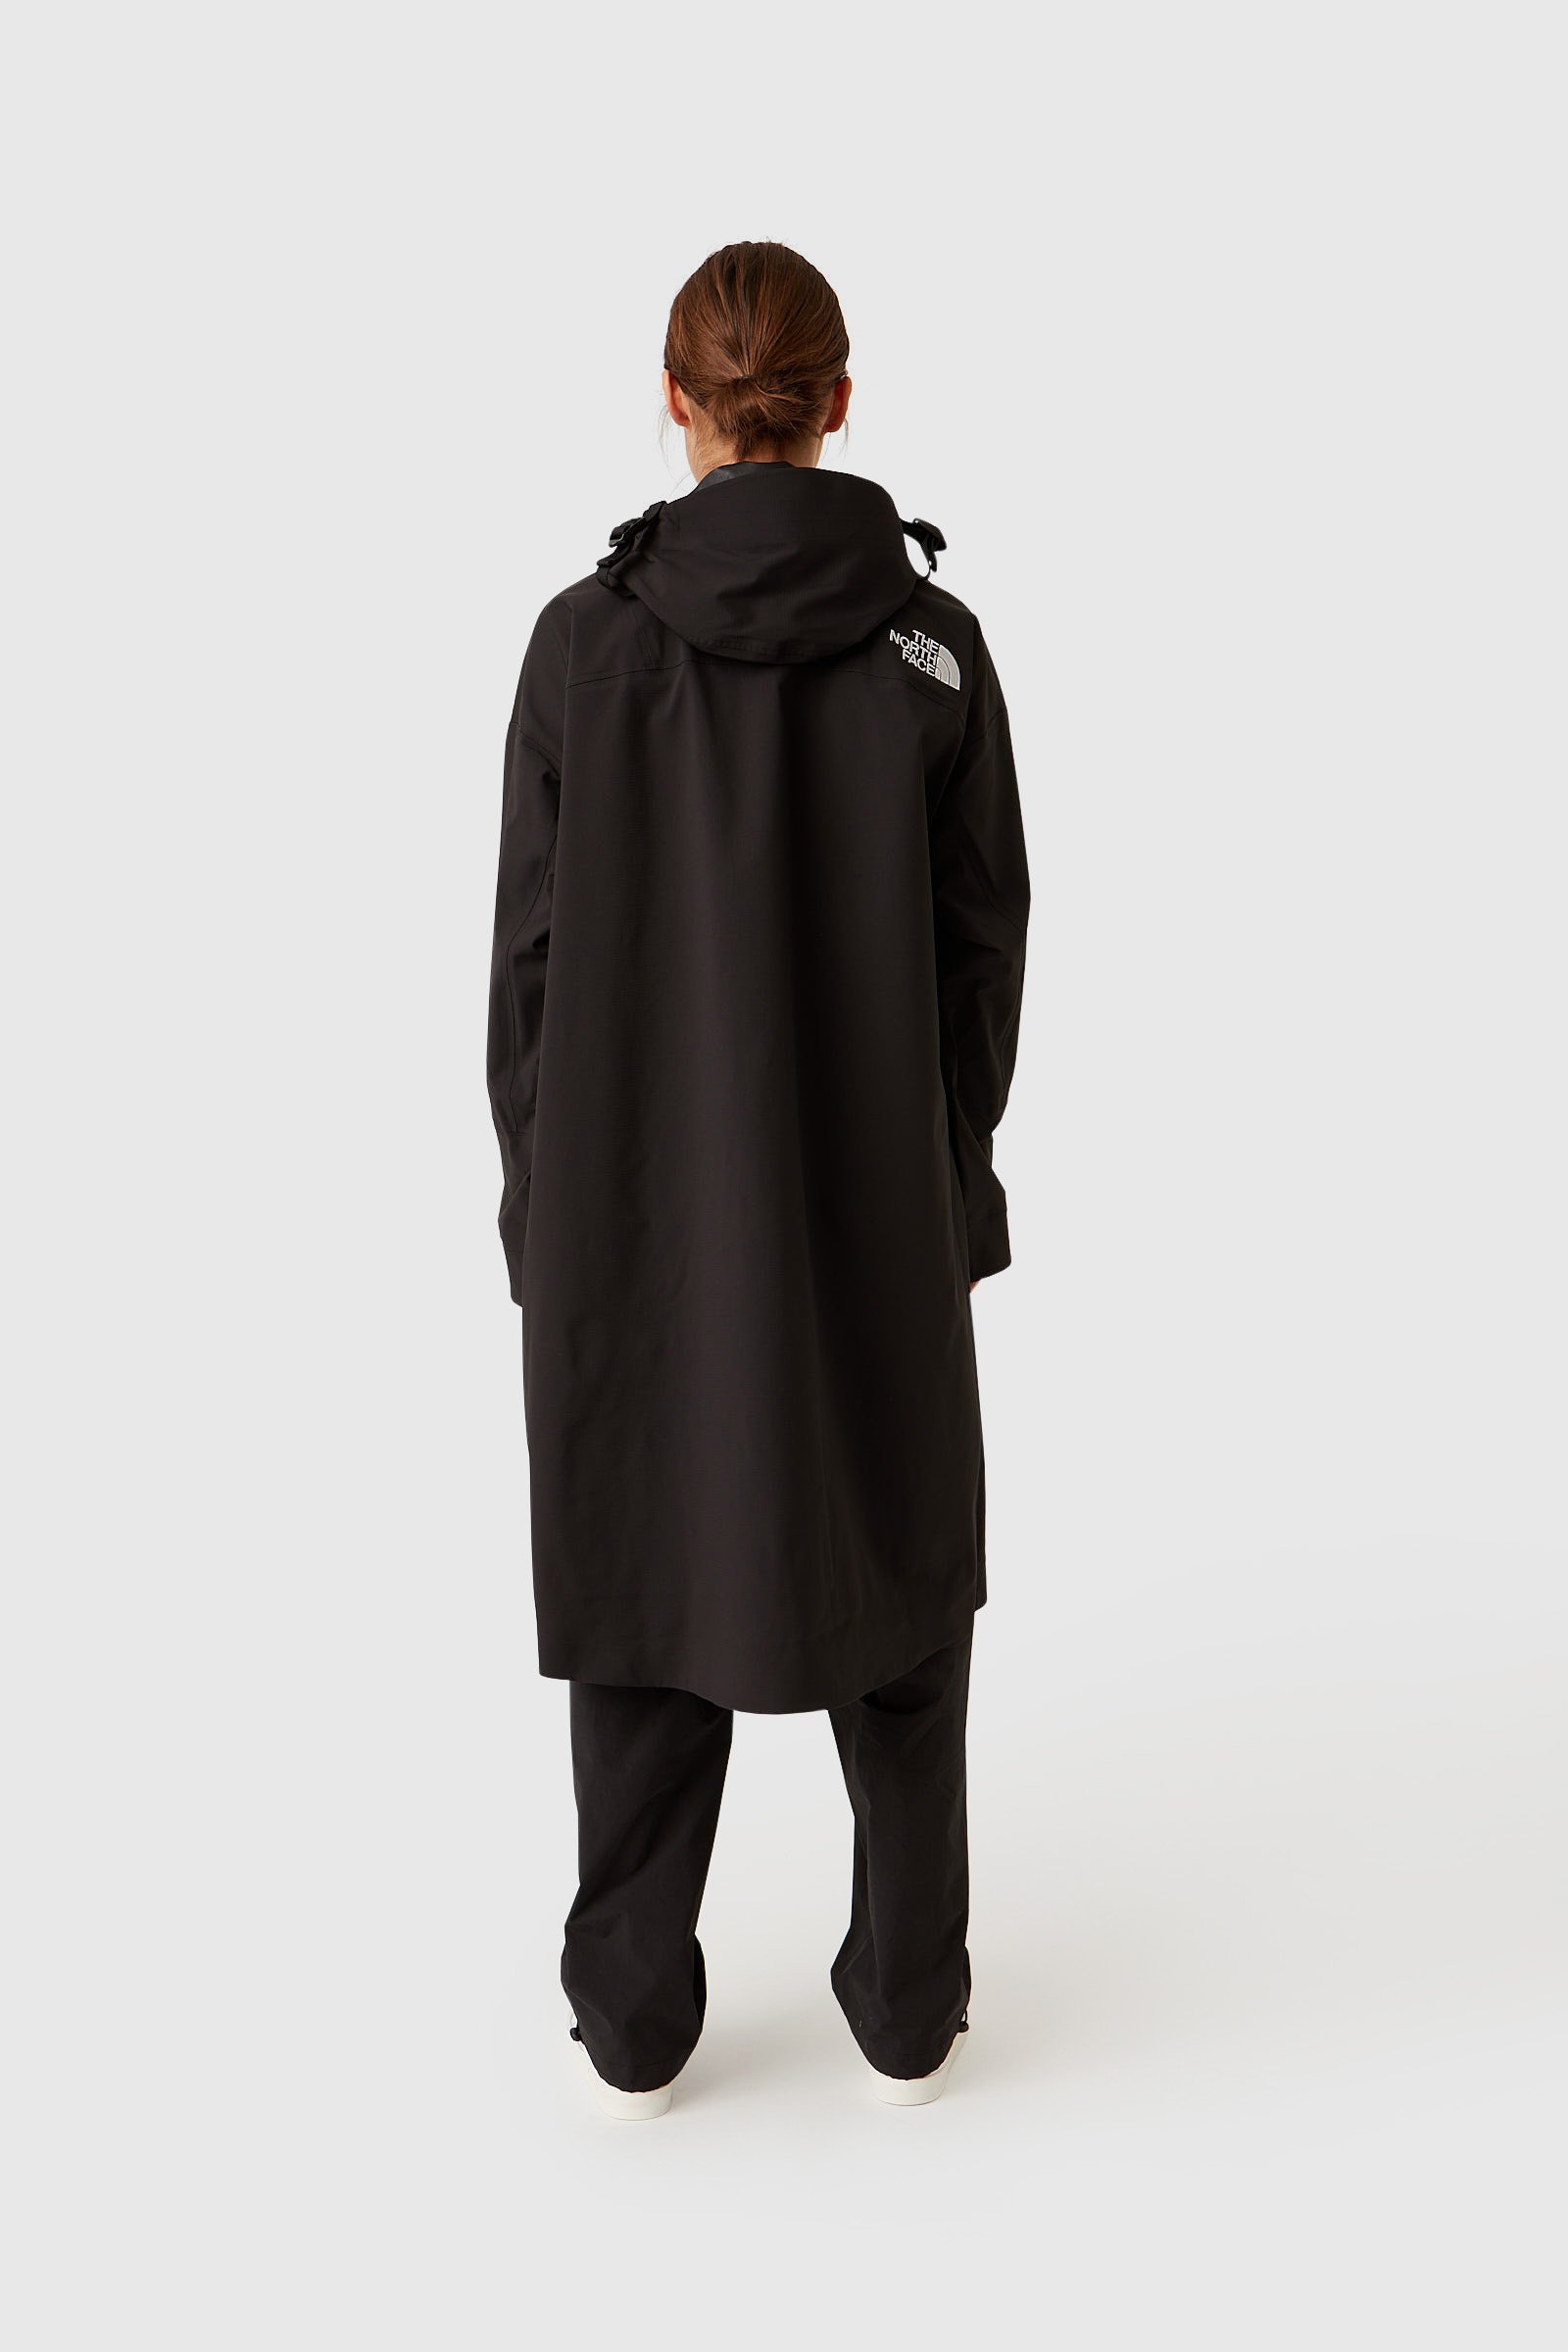 north face trench